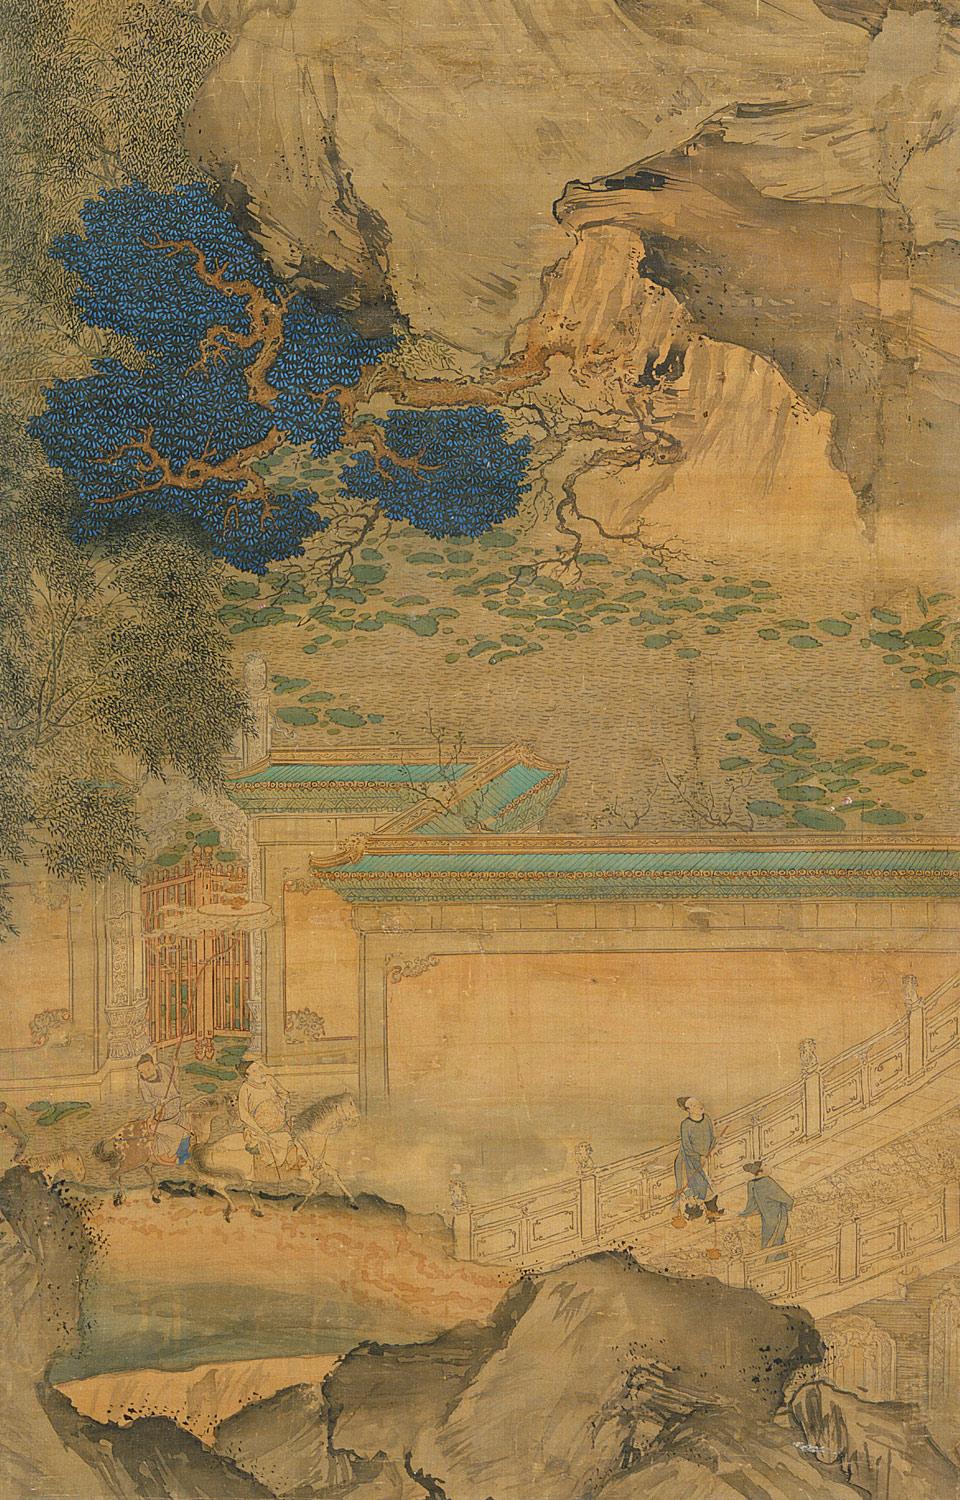 A detail from "The Palace of Nine Perfections," 1691, by Yuan Jiang. Set of 12 hanging scrolls with ink and color on silk, 81.5 inches by 221.7 inches. The Metropolitan Museum of Art, New York. (Public Domain)